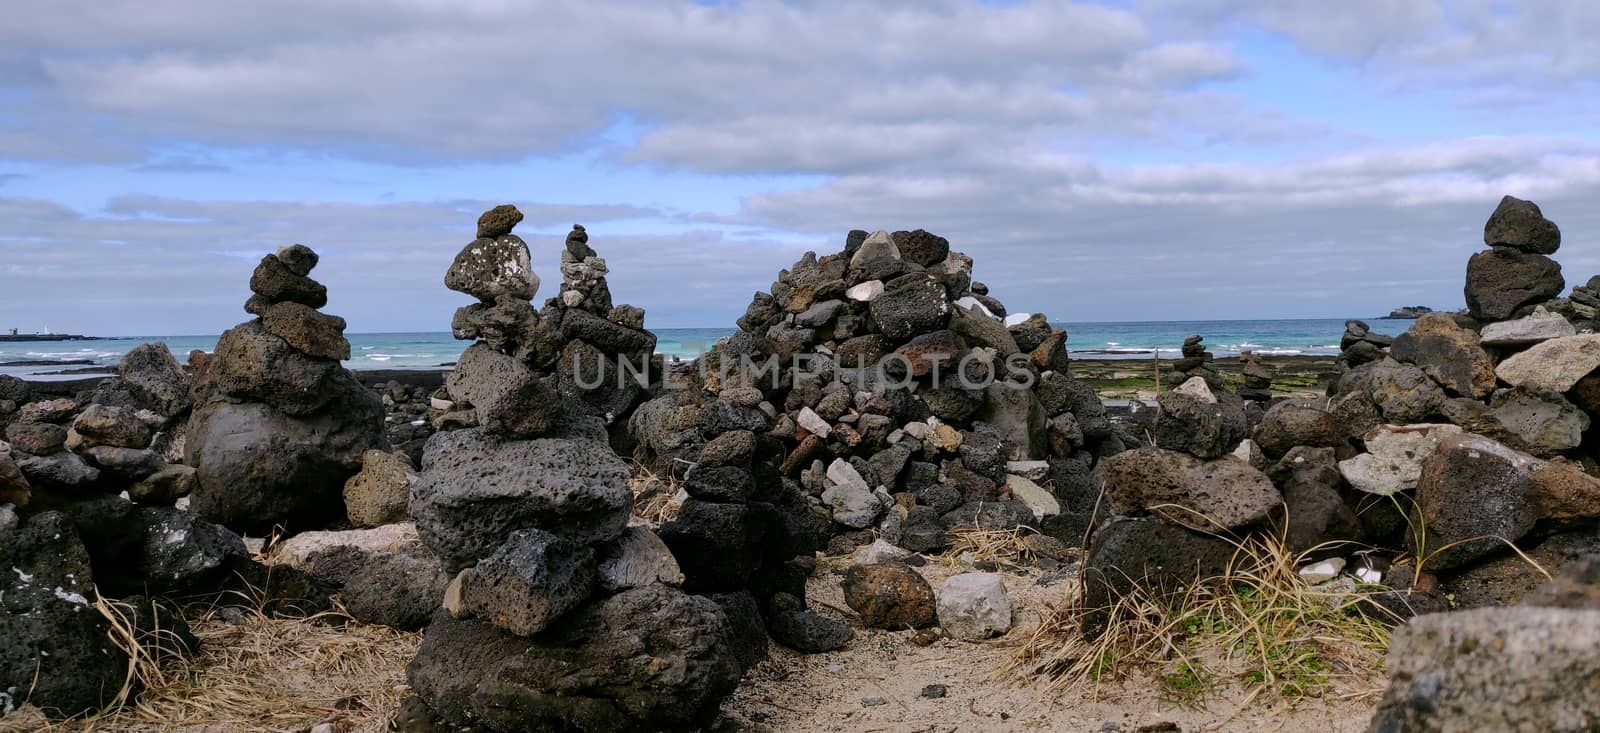 Wish rocks blocks made by people with black stones on the shore of hyeopjae beach in Jeju Island, South Korea.